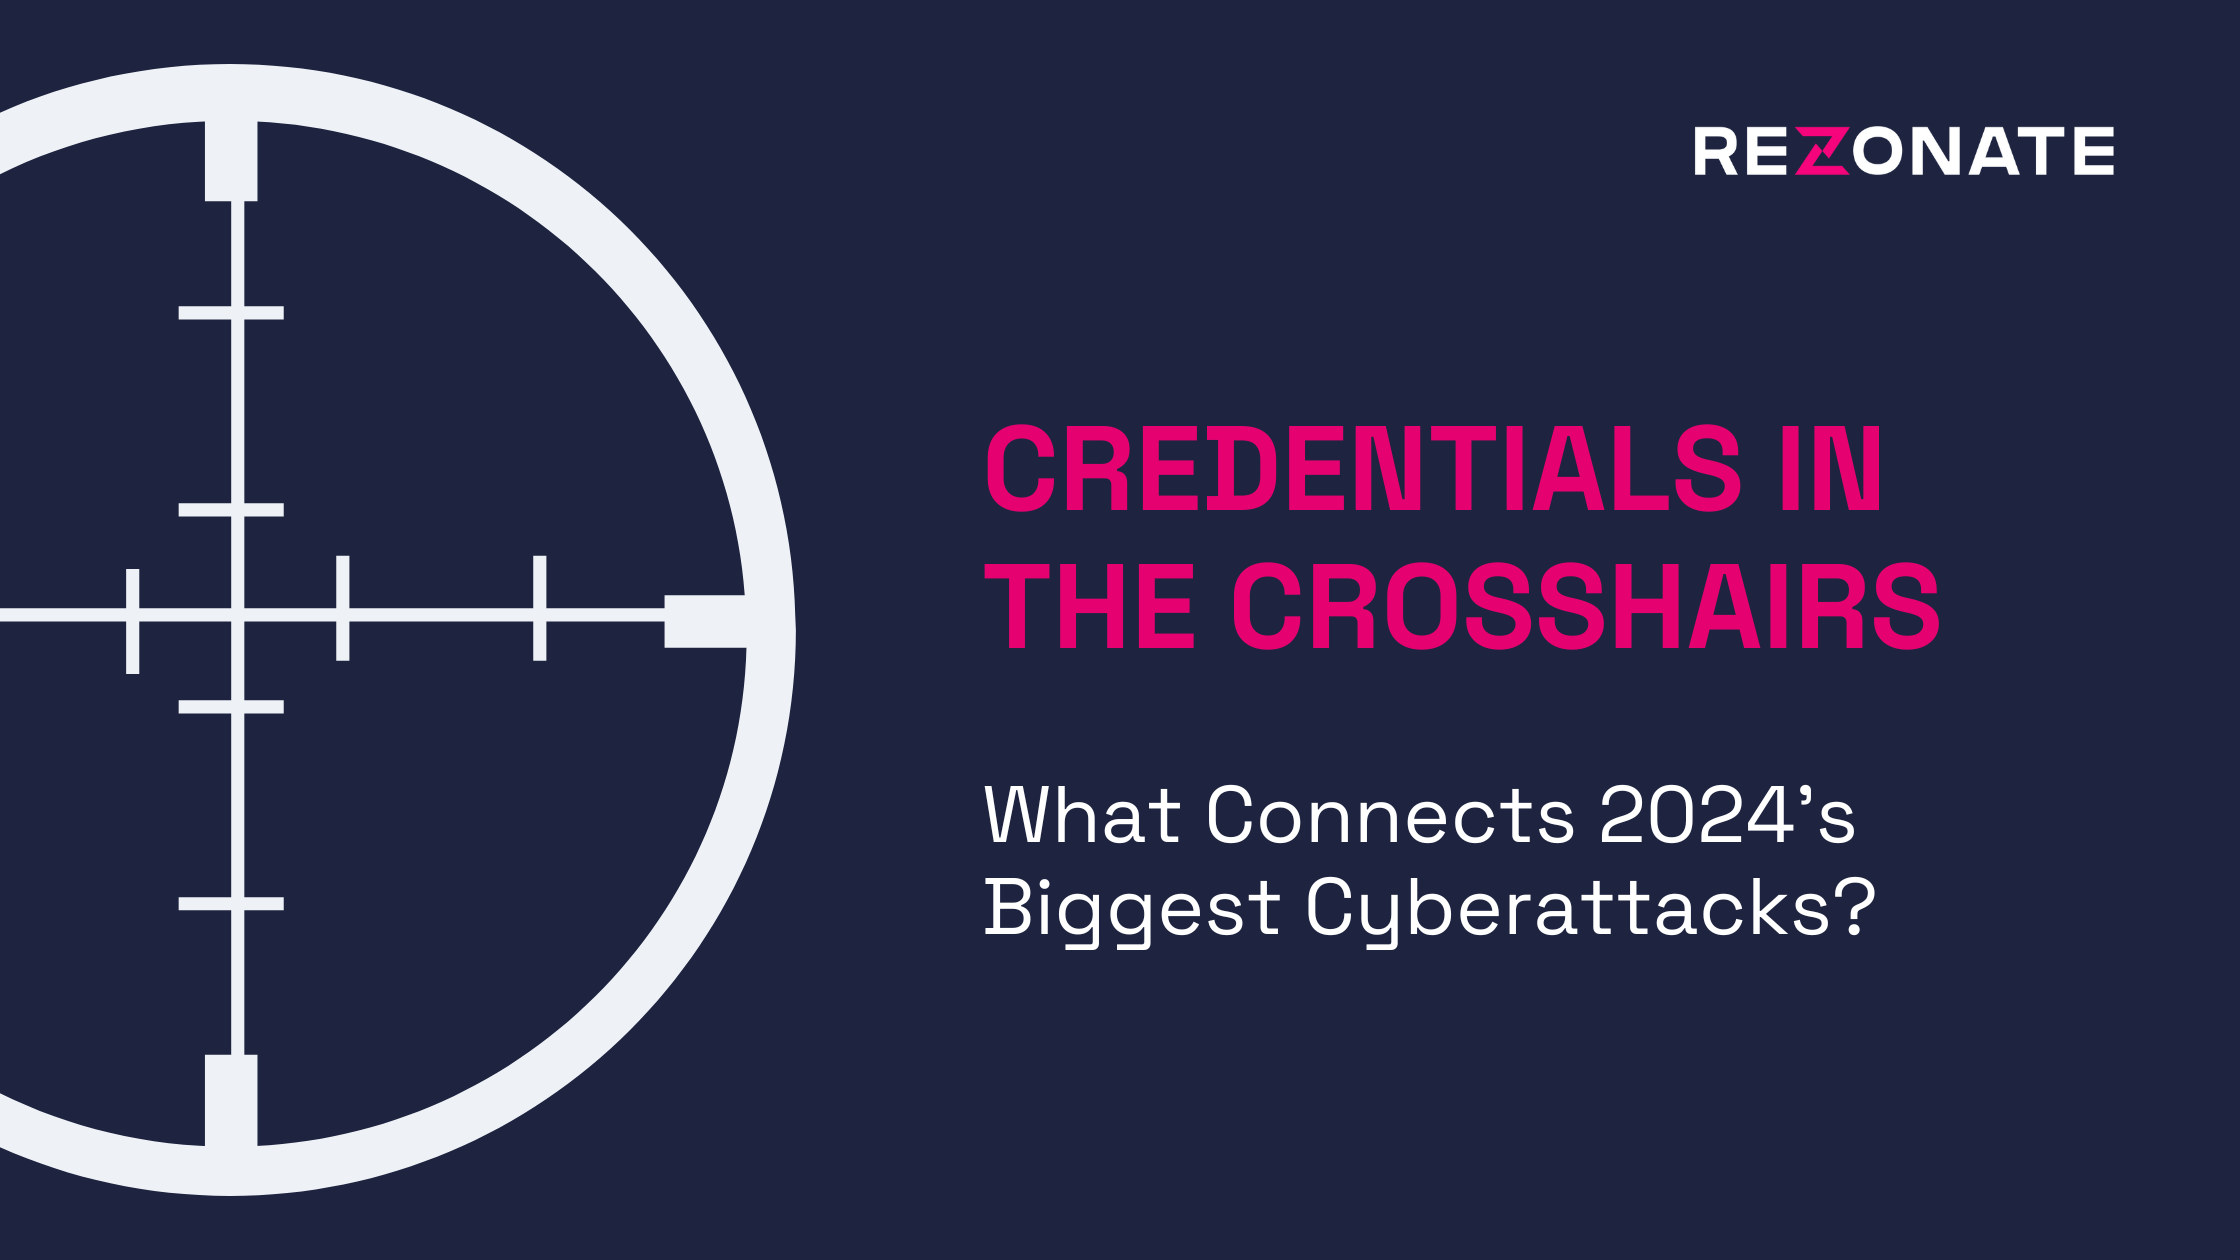 Rezonate Blog: Credentials in the Crosshairs